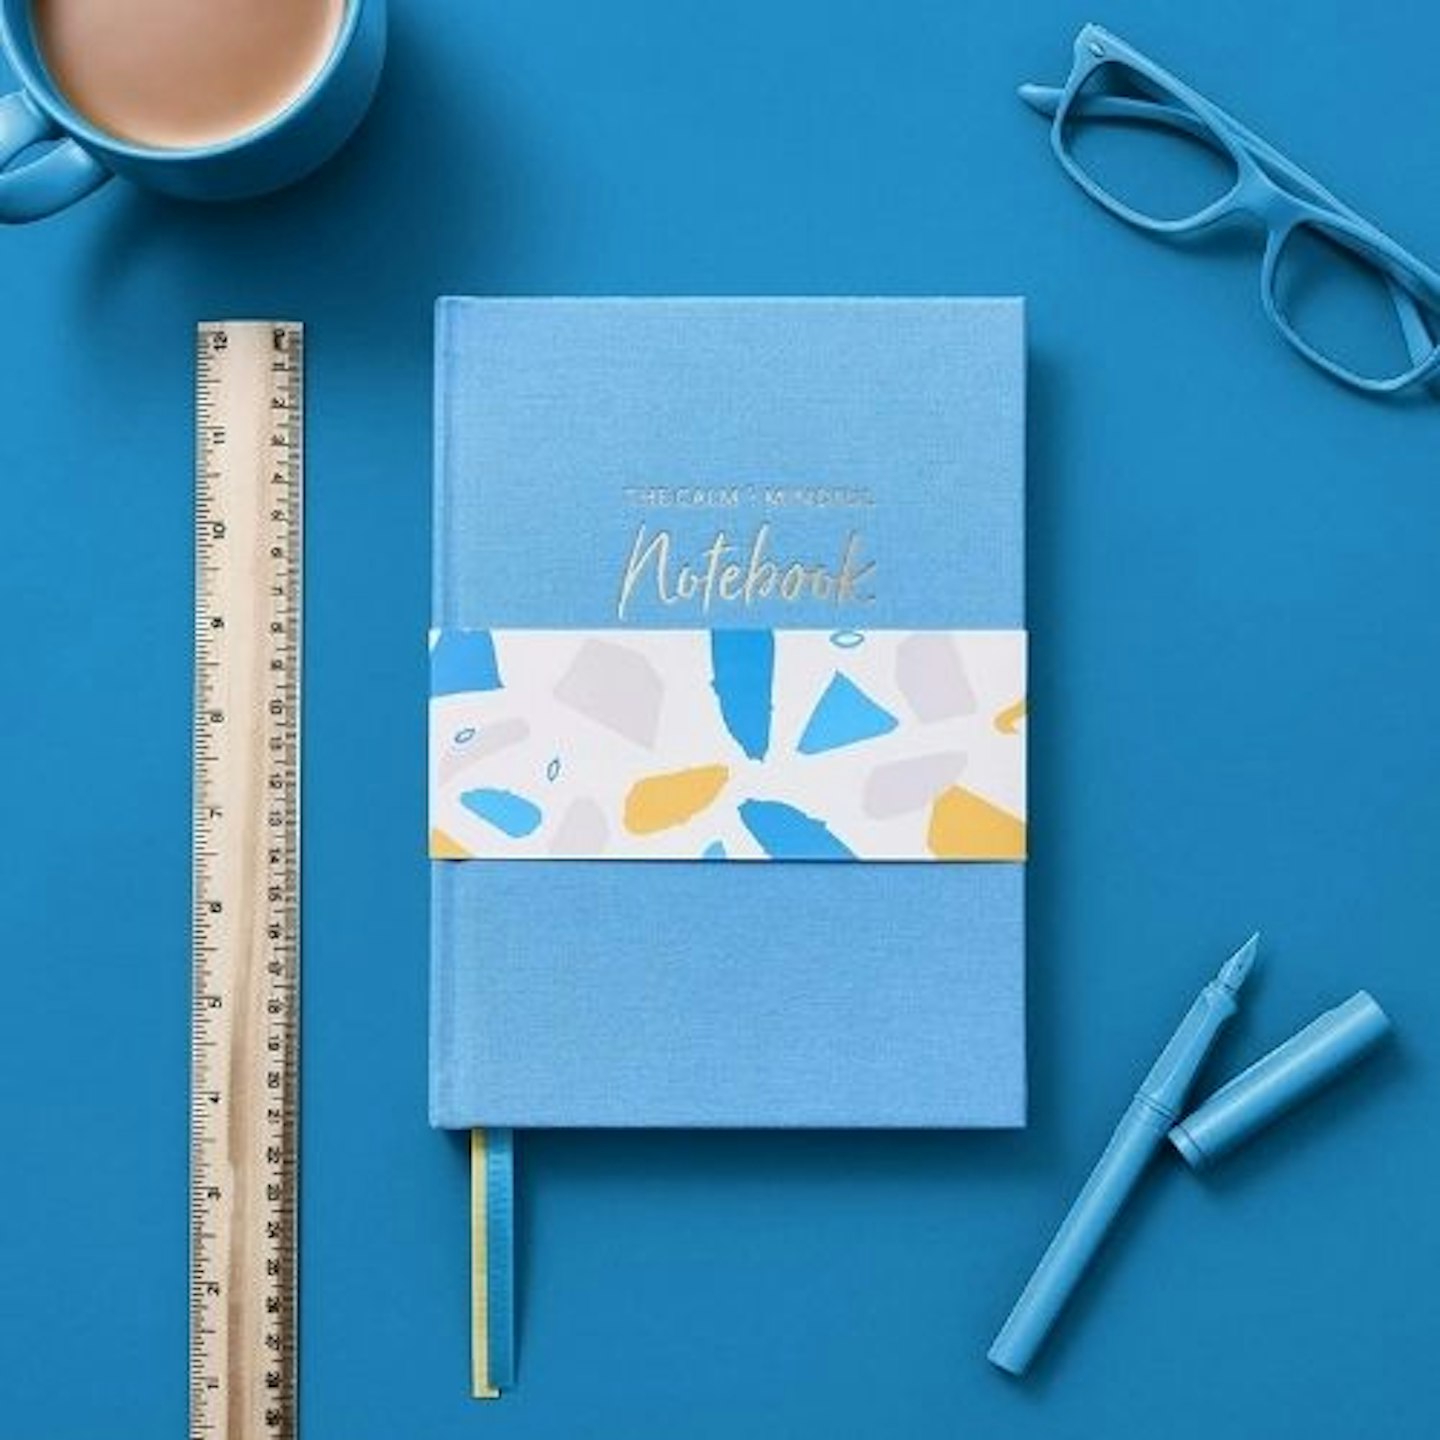 The Calm & Mindful Notebook